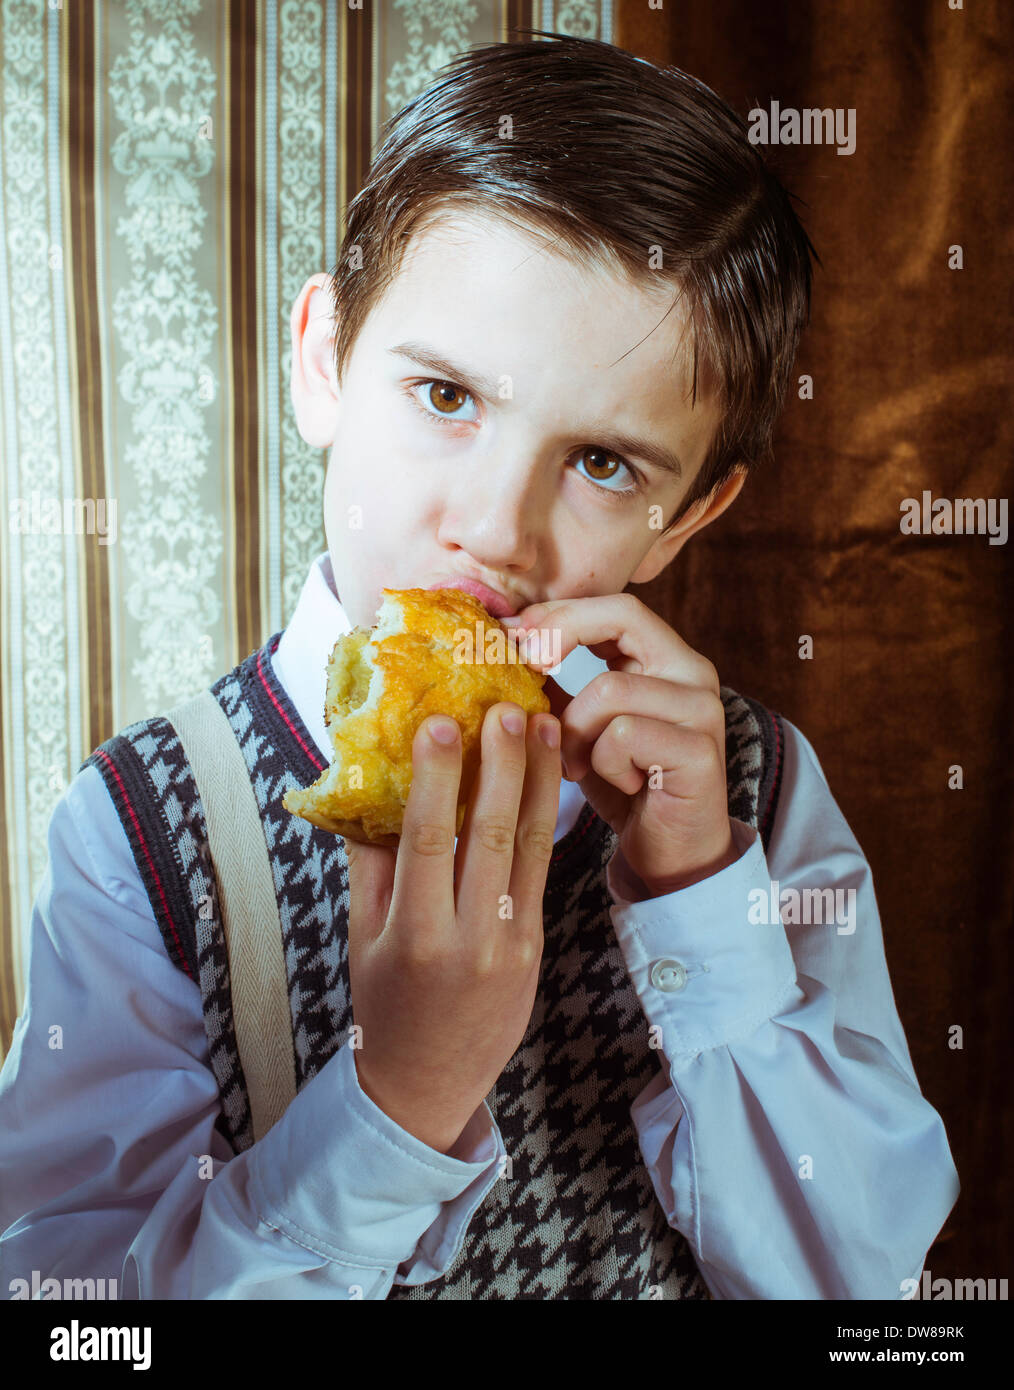 Child who eat donut. Vintage clothes and background Stock Photo